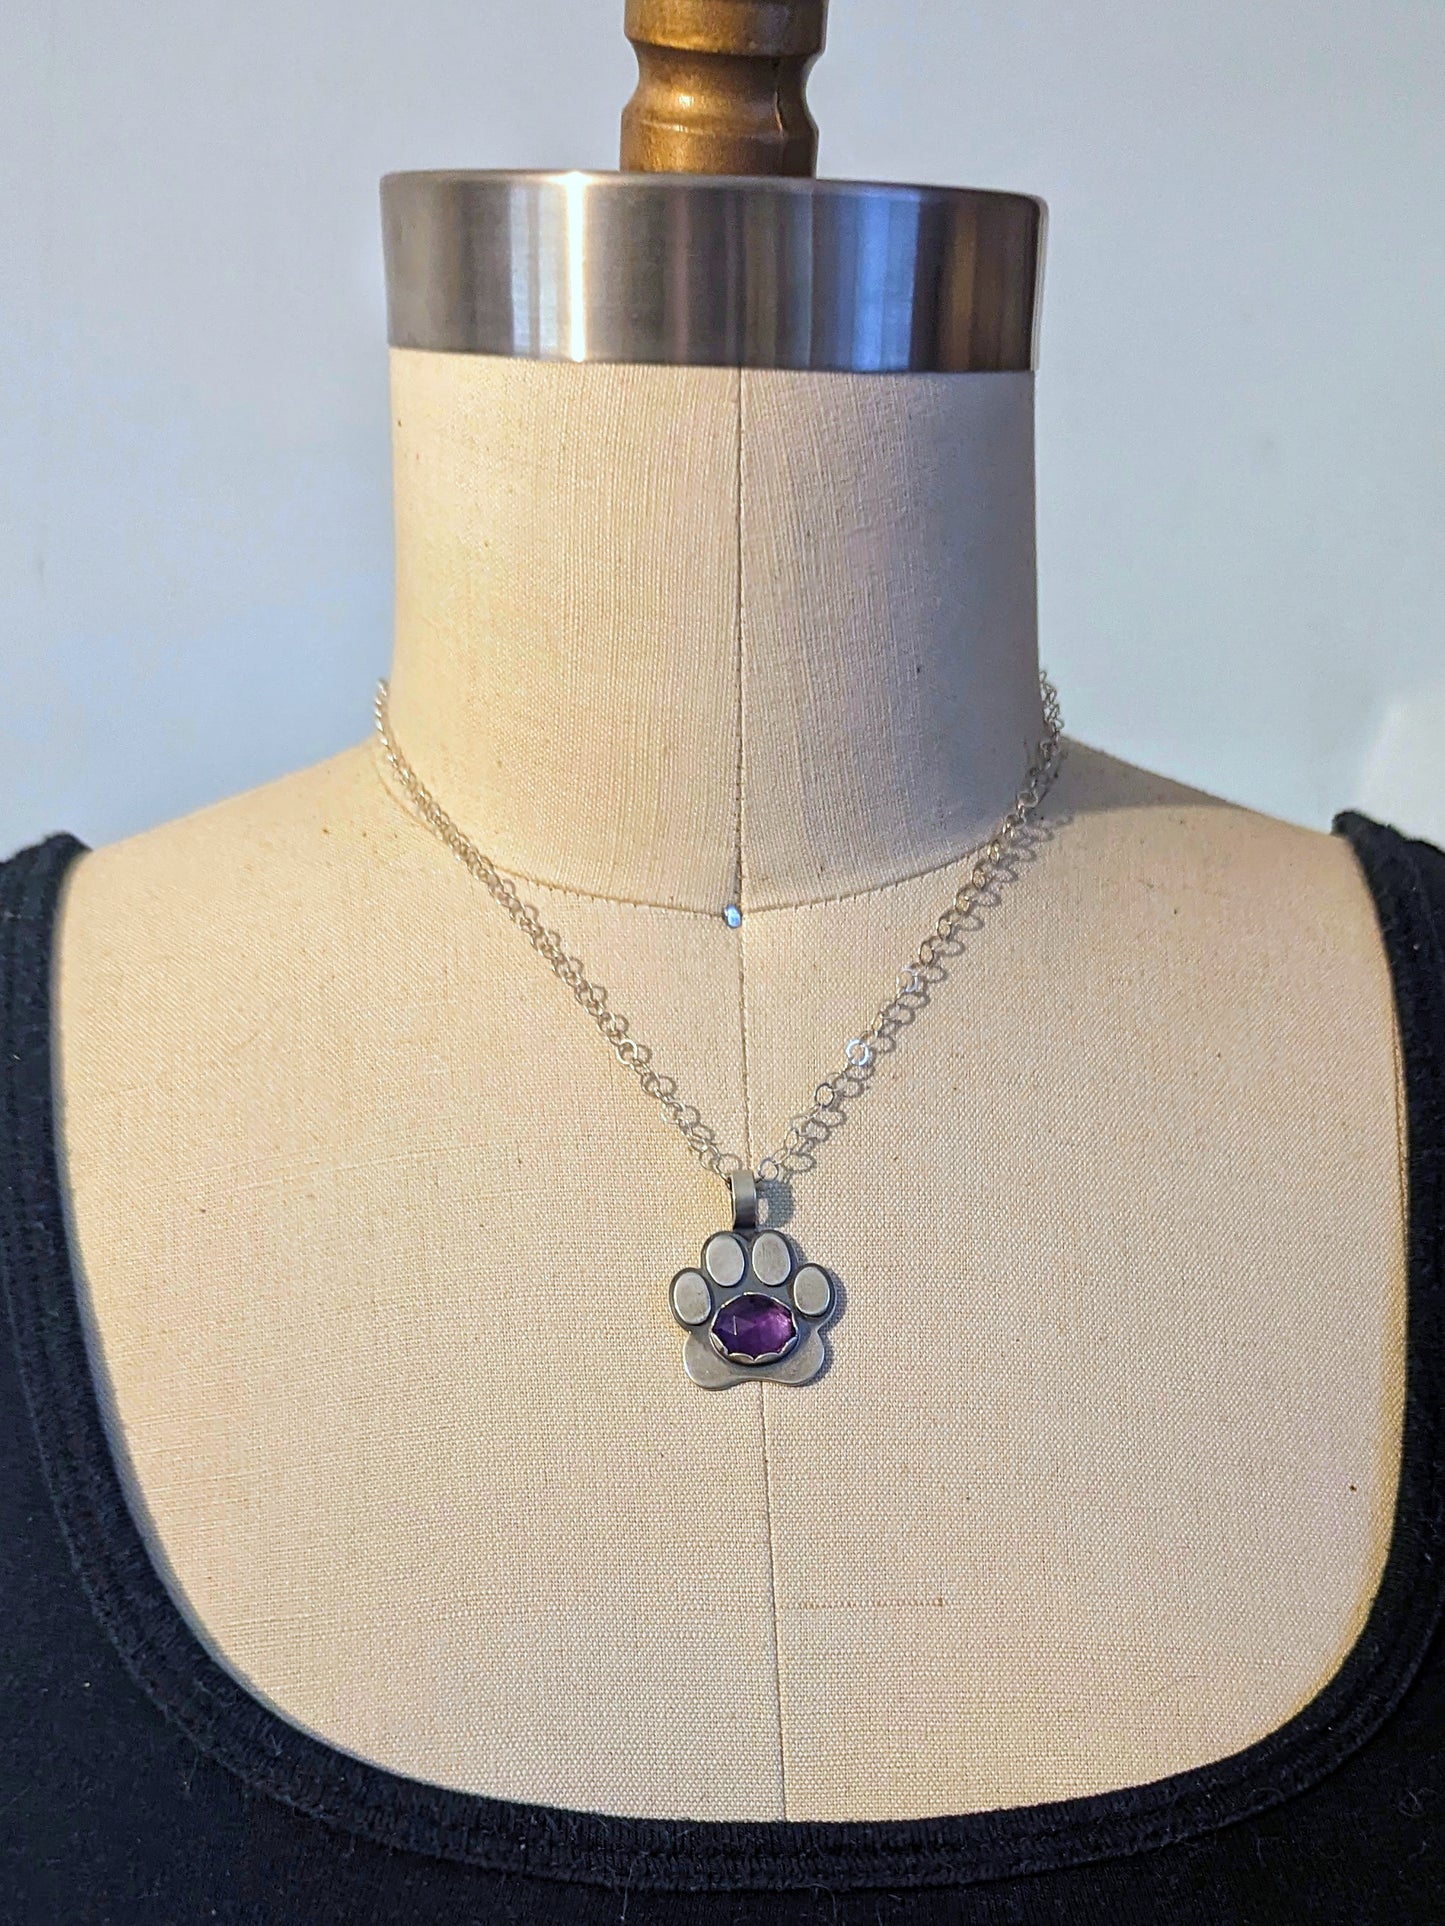 Paw Print Necklace - Amethyst